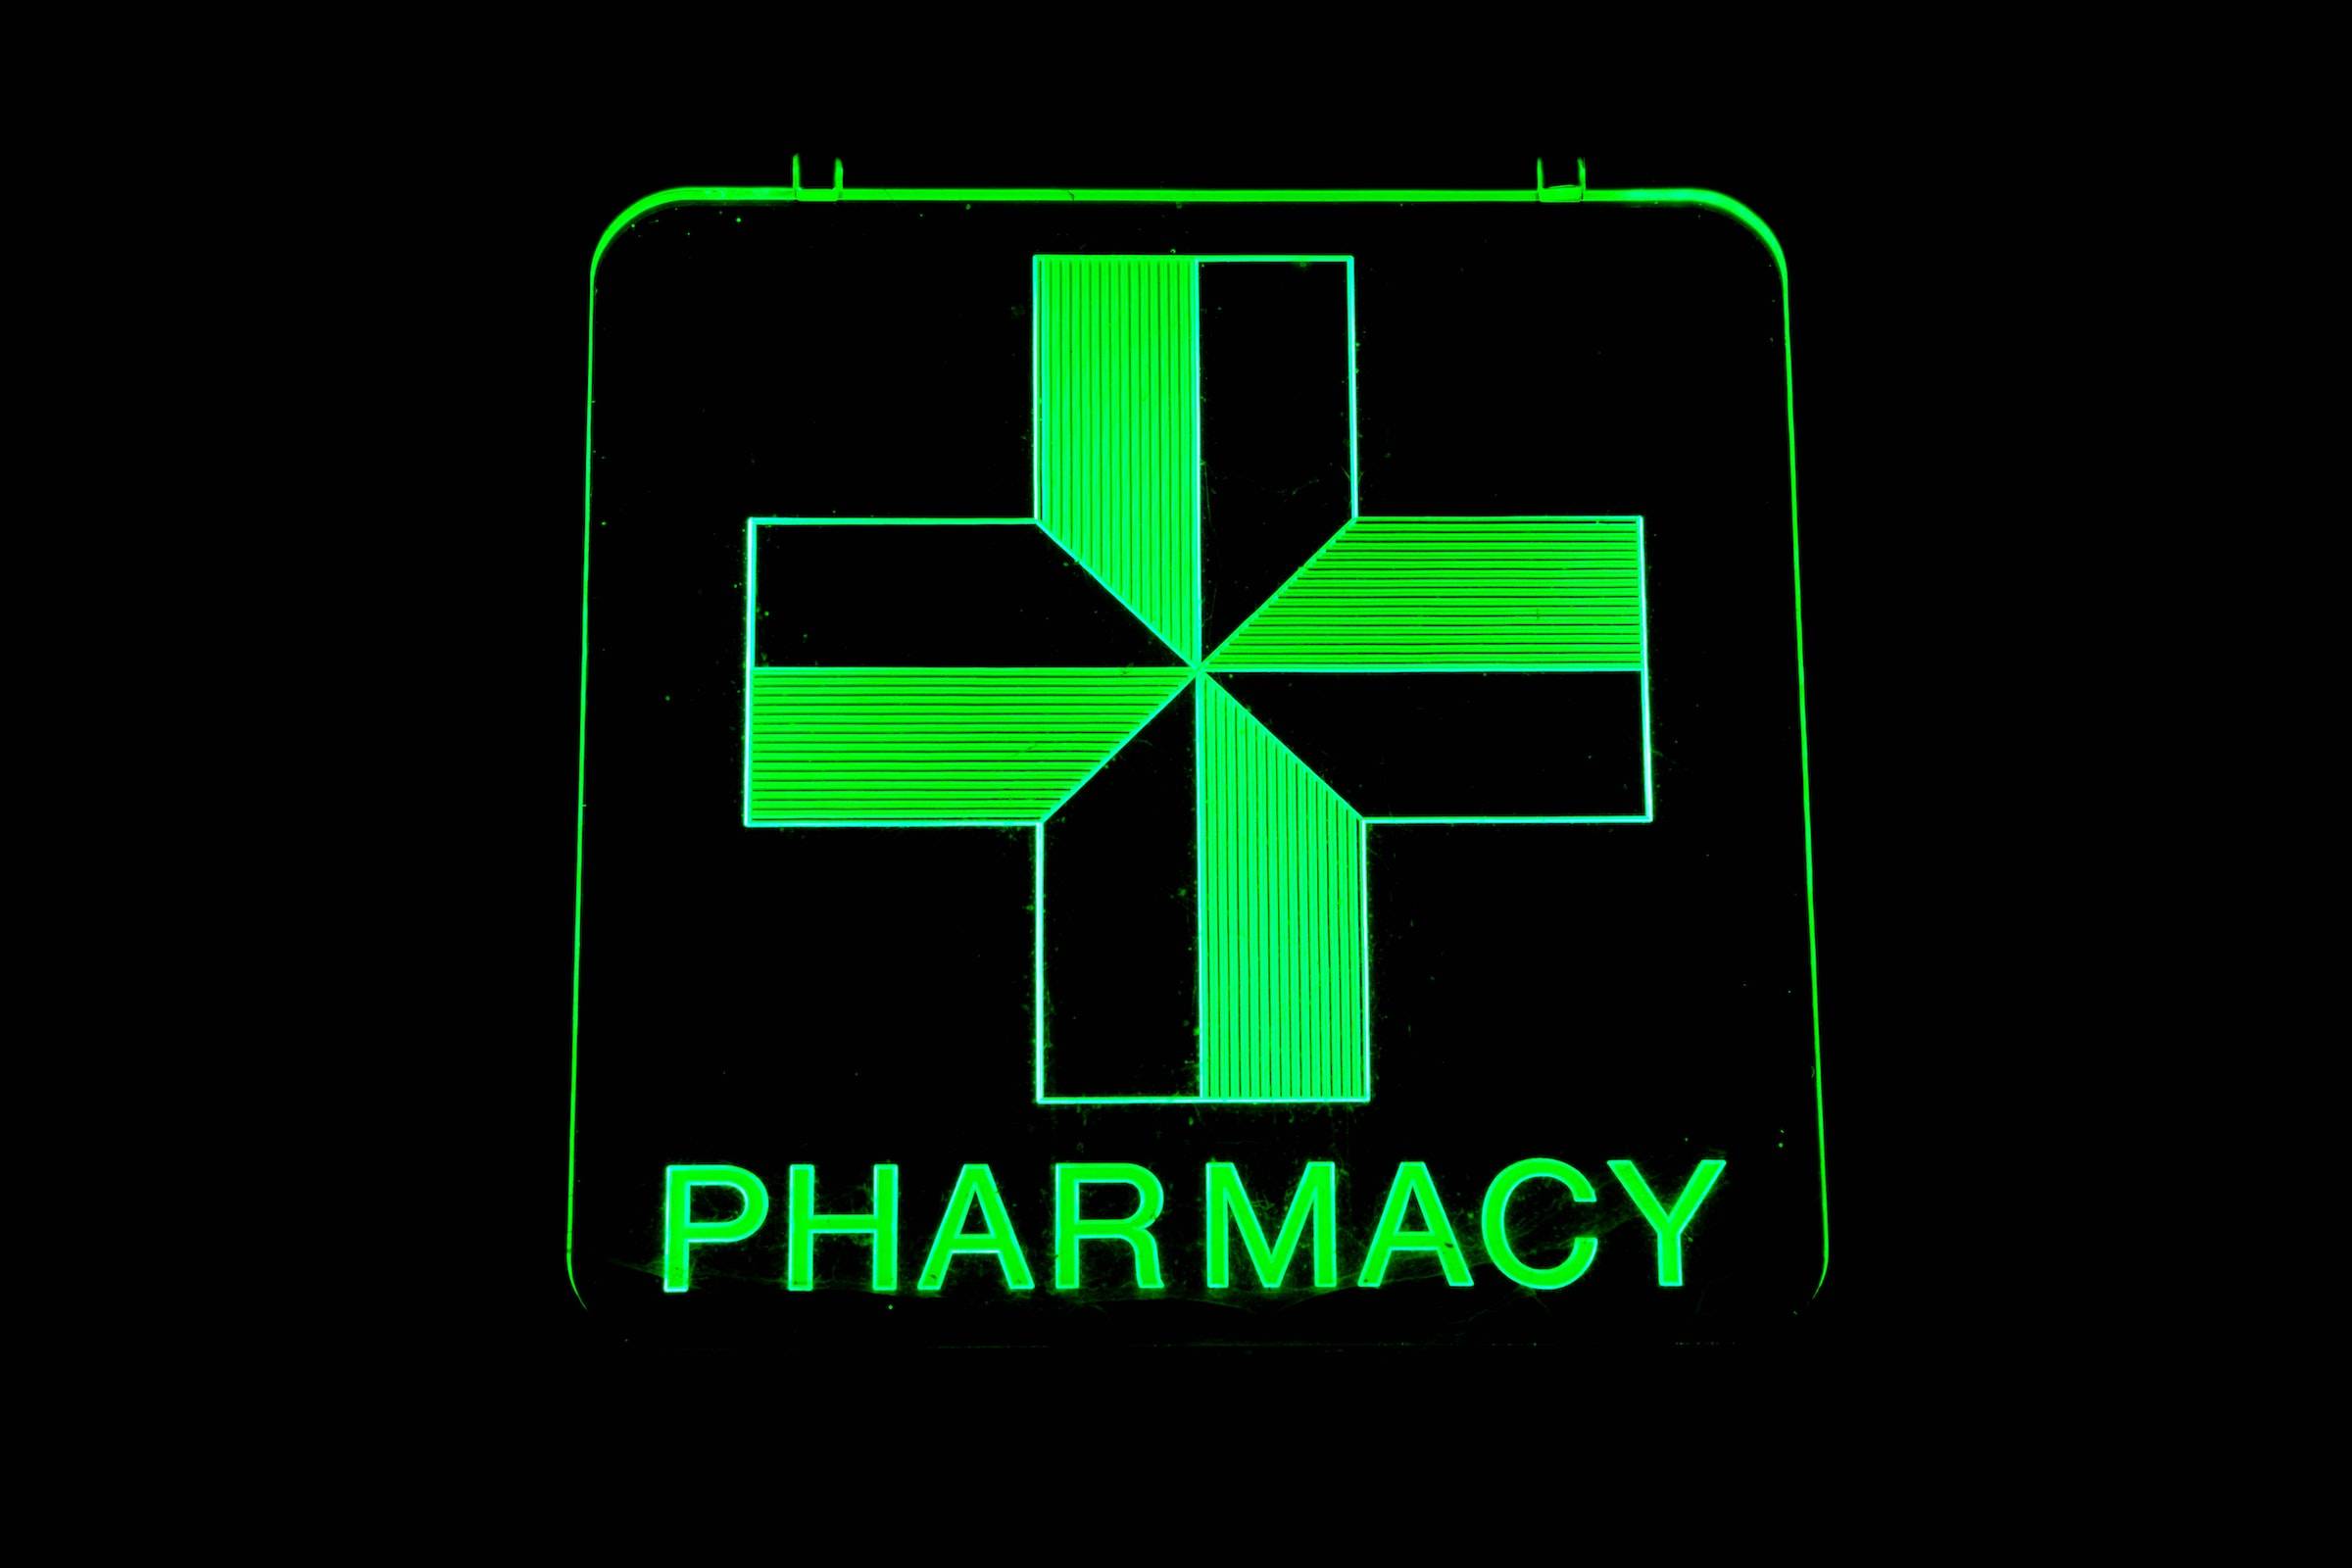 Digitalisation needed to shape and support future of UK’s pharmacy sector